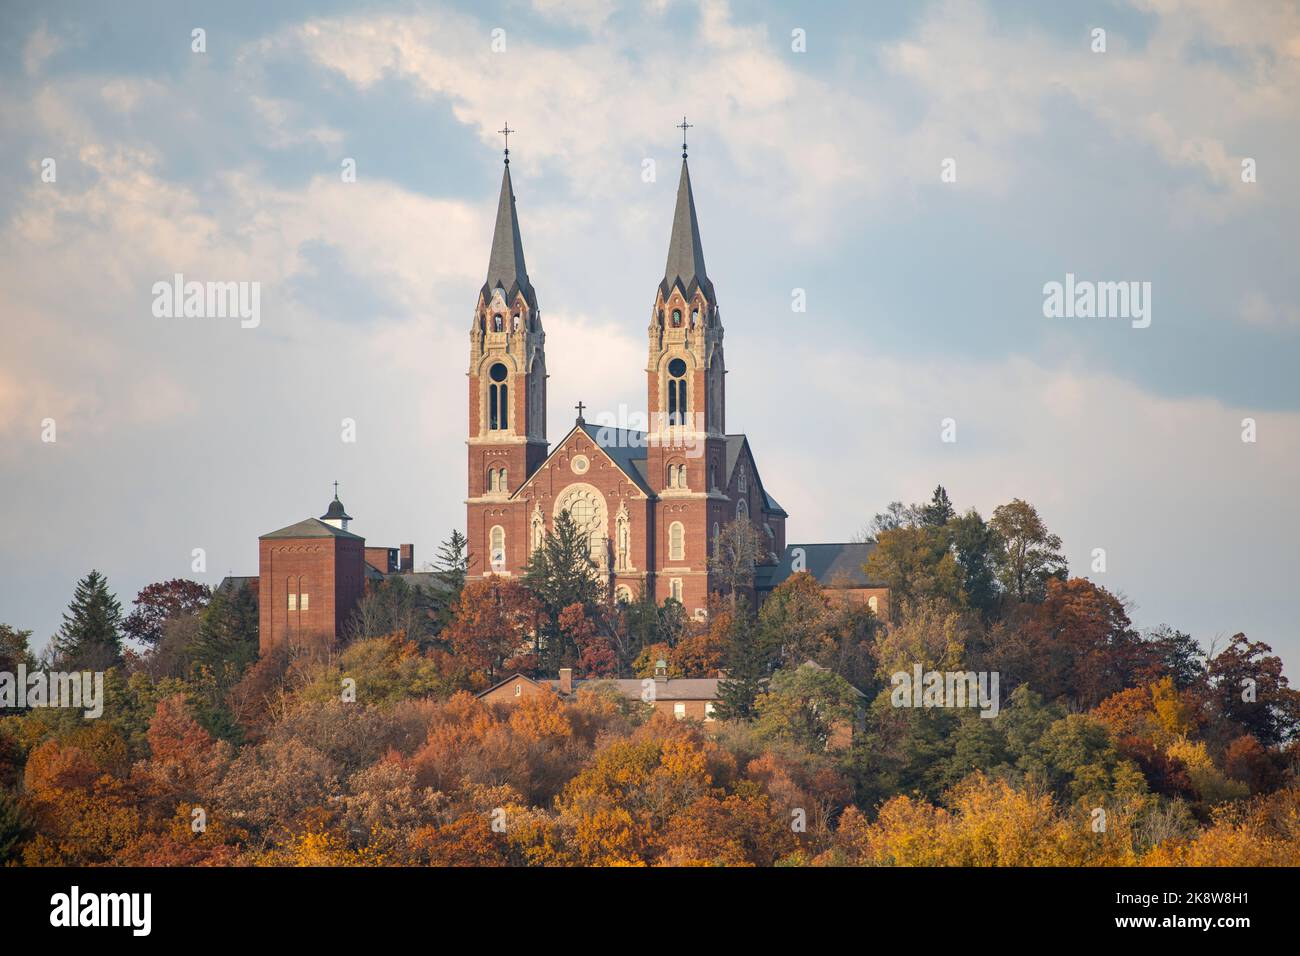 Holy Hill National Shrine of Mary church located in Wisconsin Stock Photo